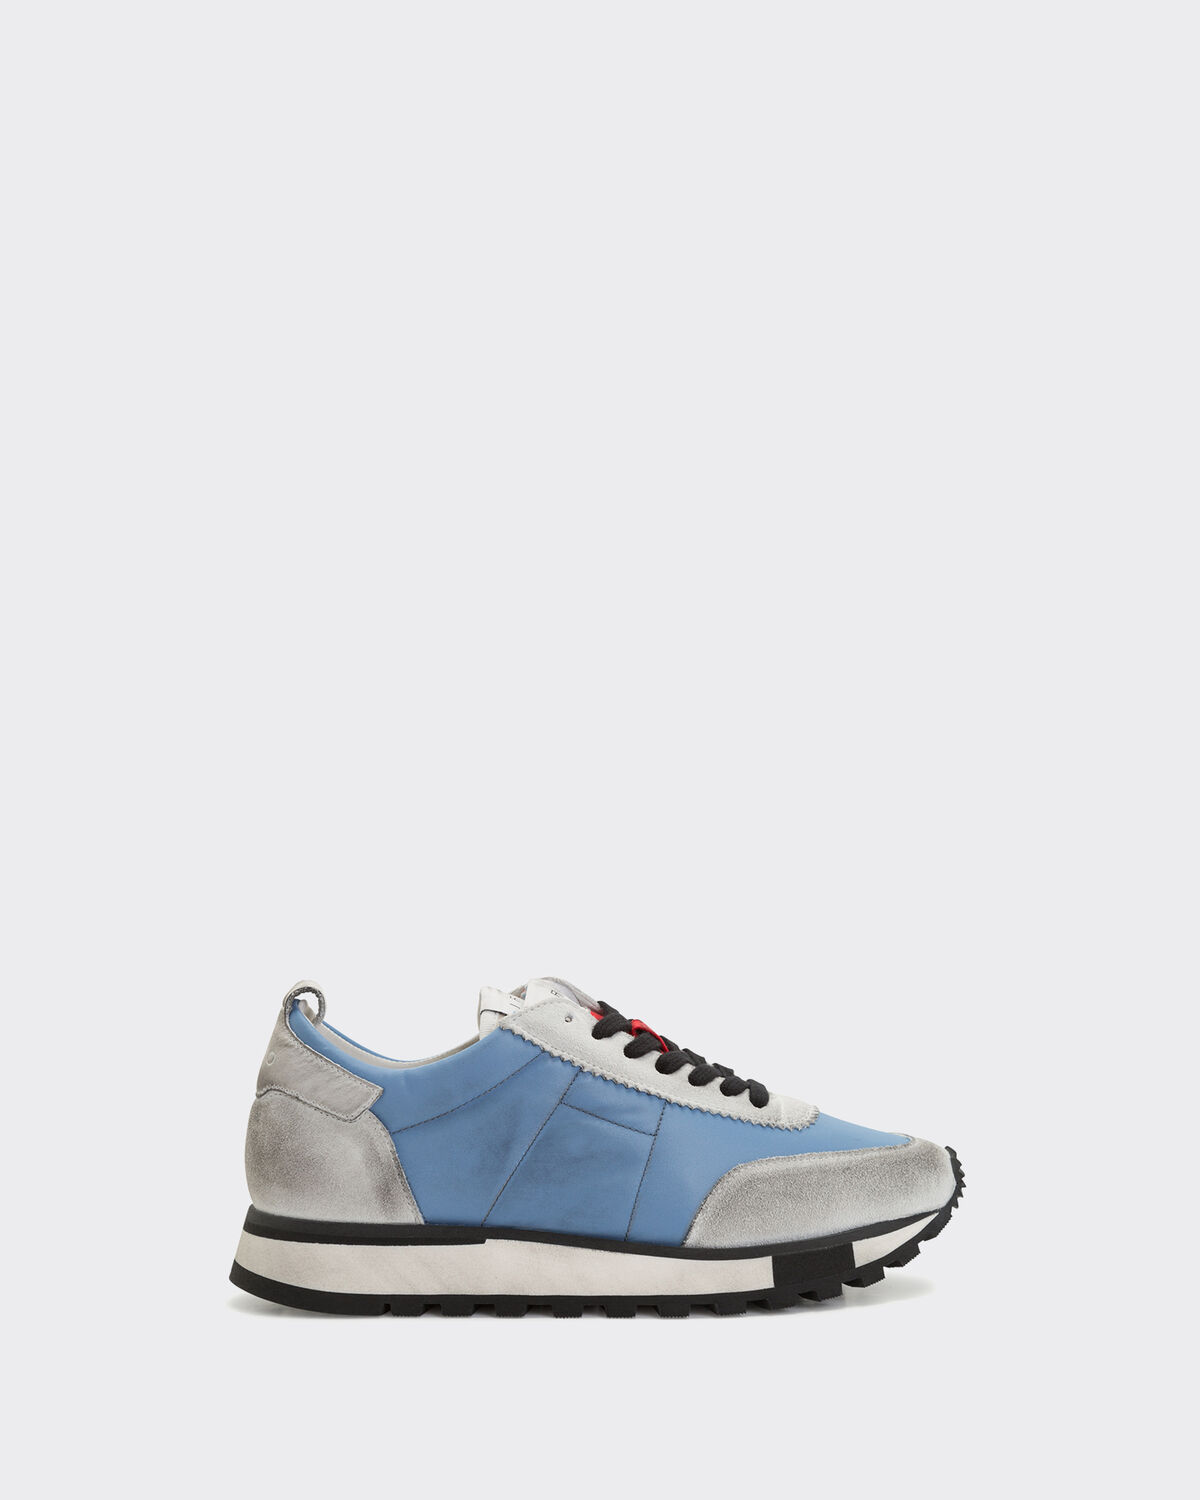 Photo of IRO Paris Vintager Sneakers Blue - These Vintage-look Sportswear Sneakers Are A Must In The Iro Locker Room This Season. Dare To Use Contrasts And Combine This Pair With A Fluid And Airy Dress. New In